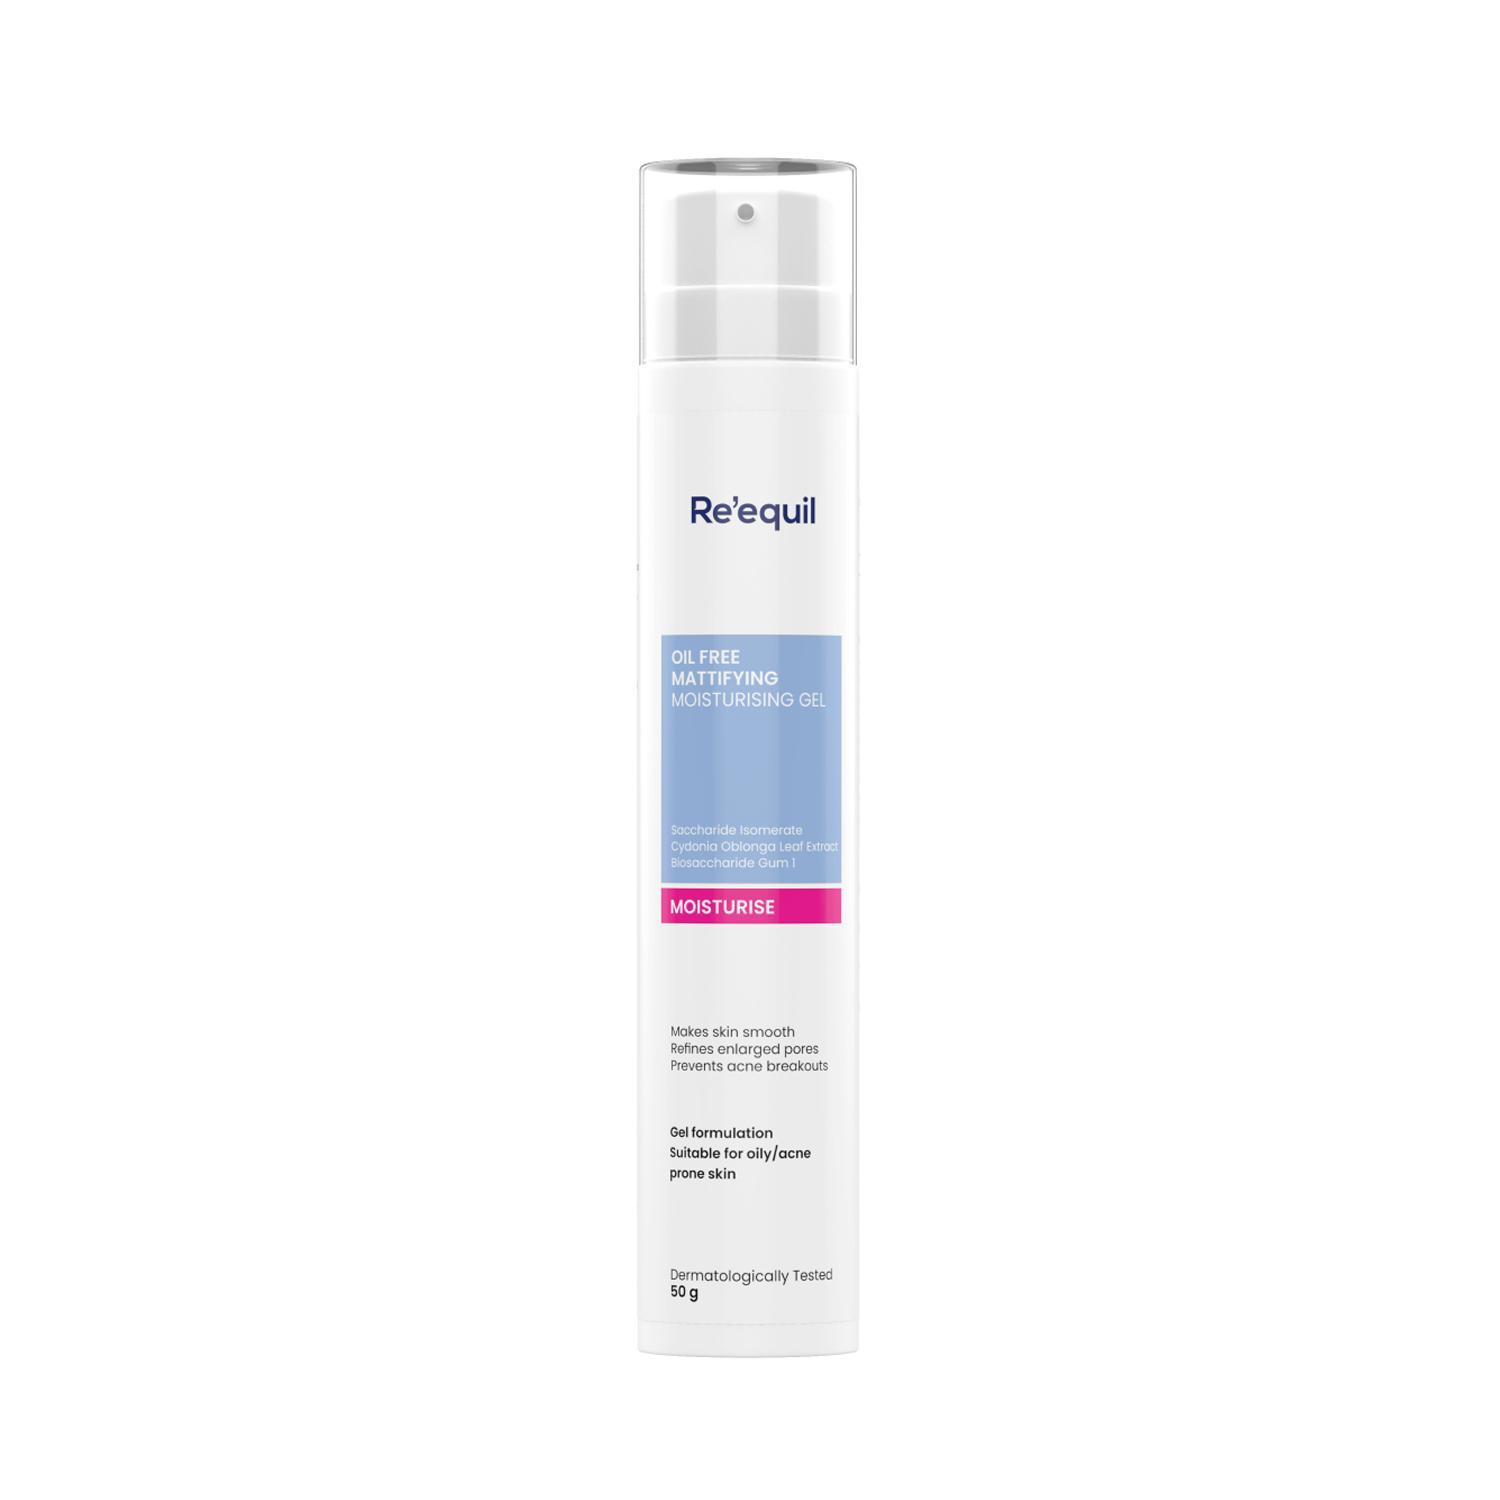 re'equil-oil-free-mattifying-moisturizer-(50g)